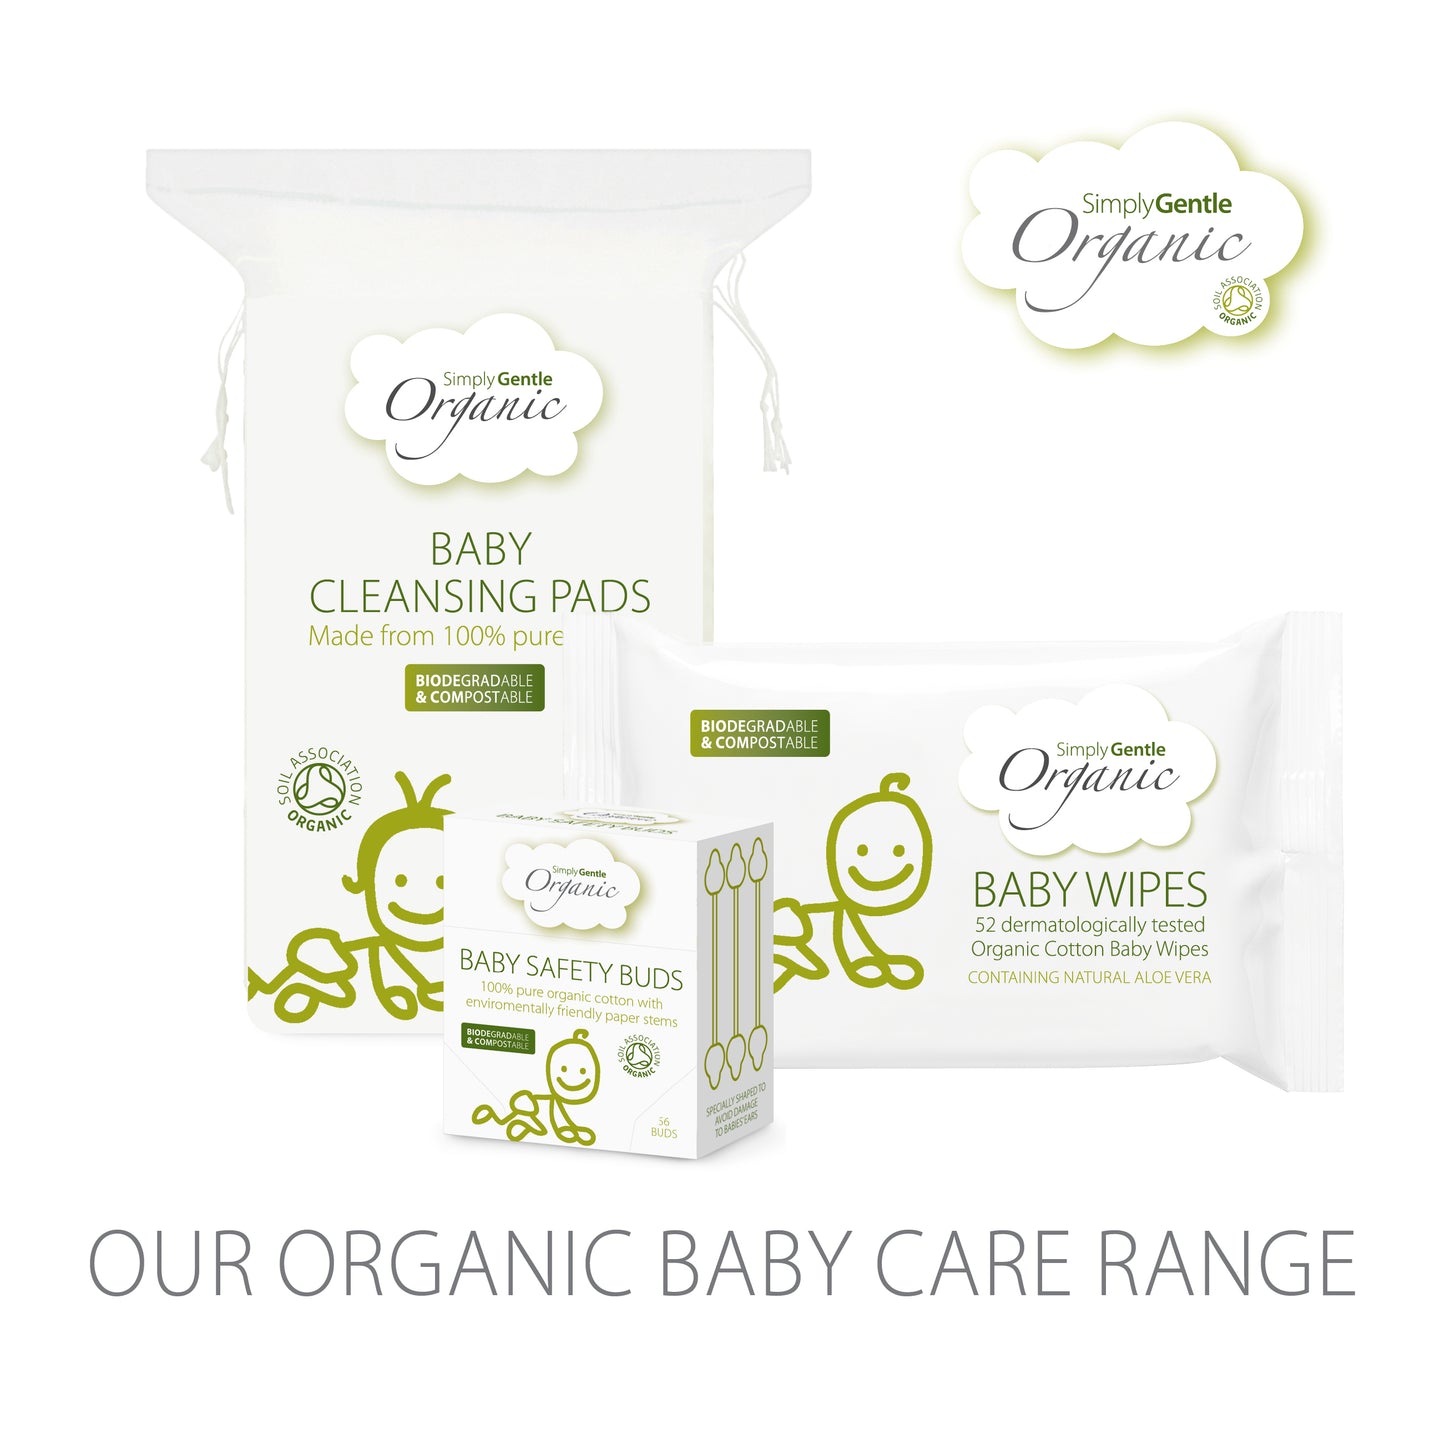 The Simply Gentle Pittapatta Organic Bodycare Range has been developed for maximum comfort and protection for babies and infants. Using a combination of natural and organic ingredients, Simply Gentle’s products means that you are doing more than just looking after yourself and your baby, you are also looking after the environment in which you both grow.